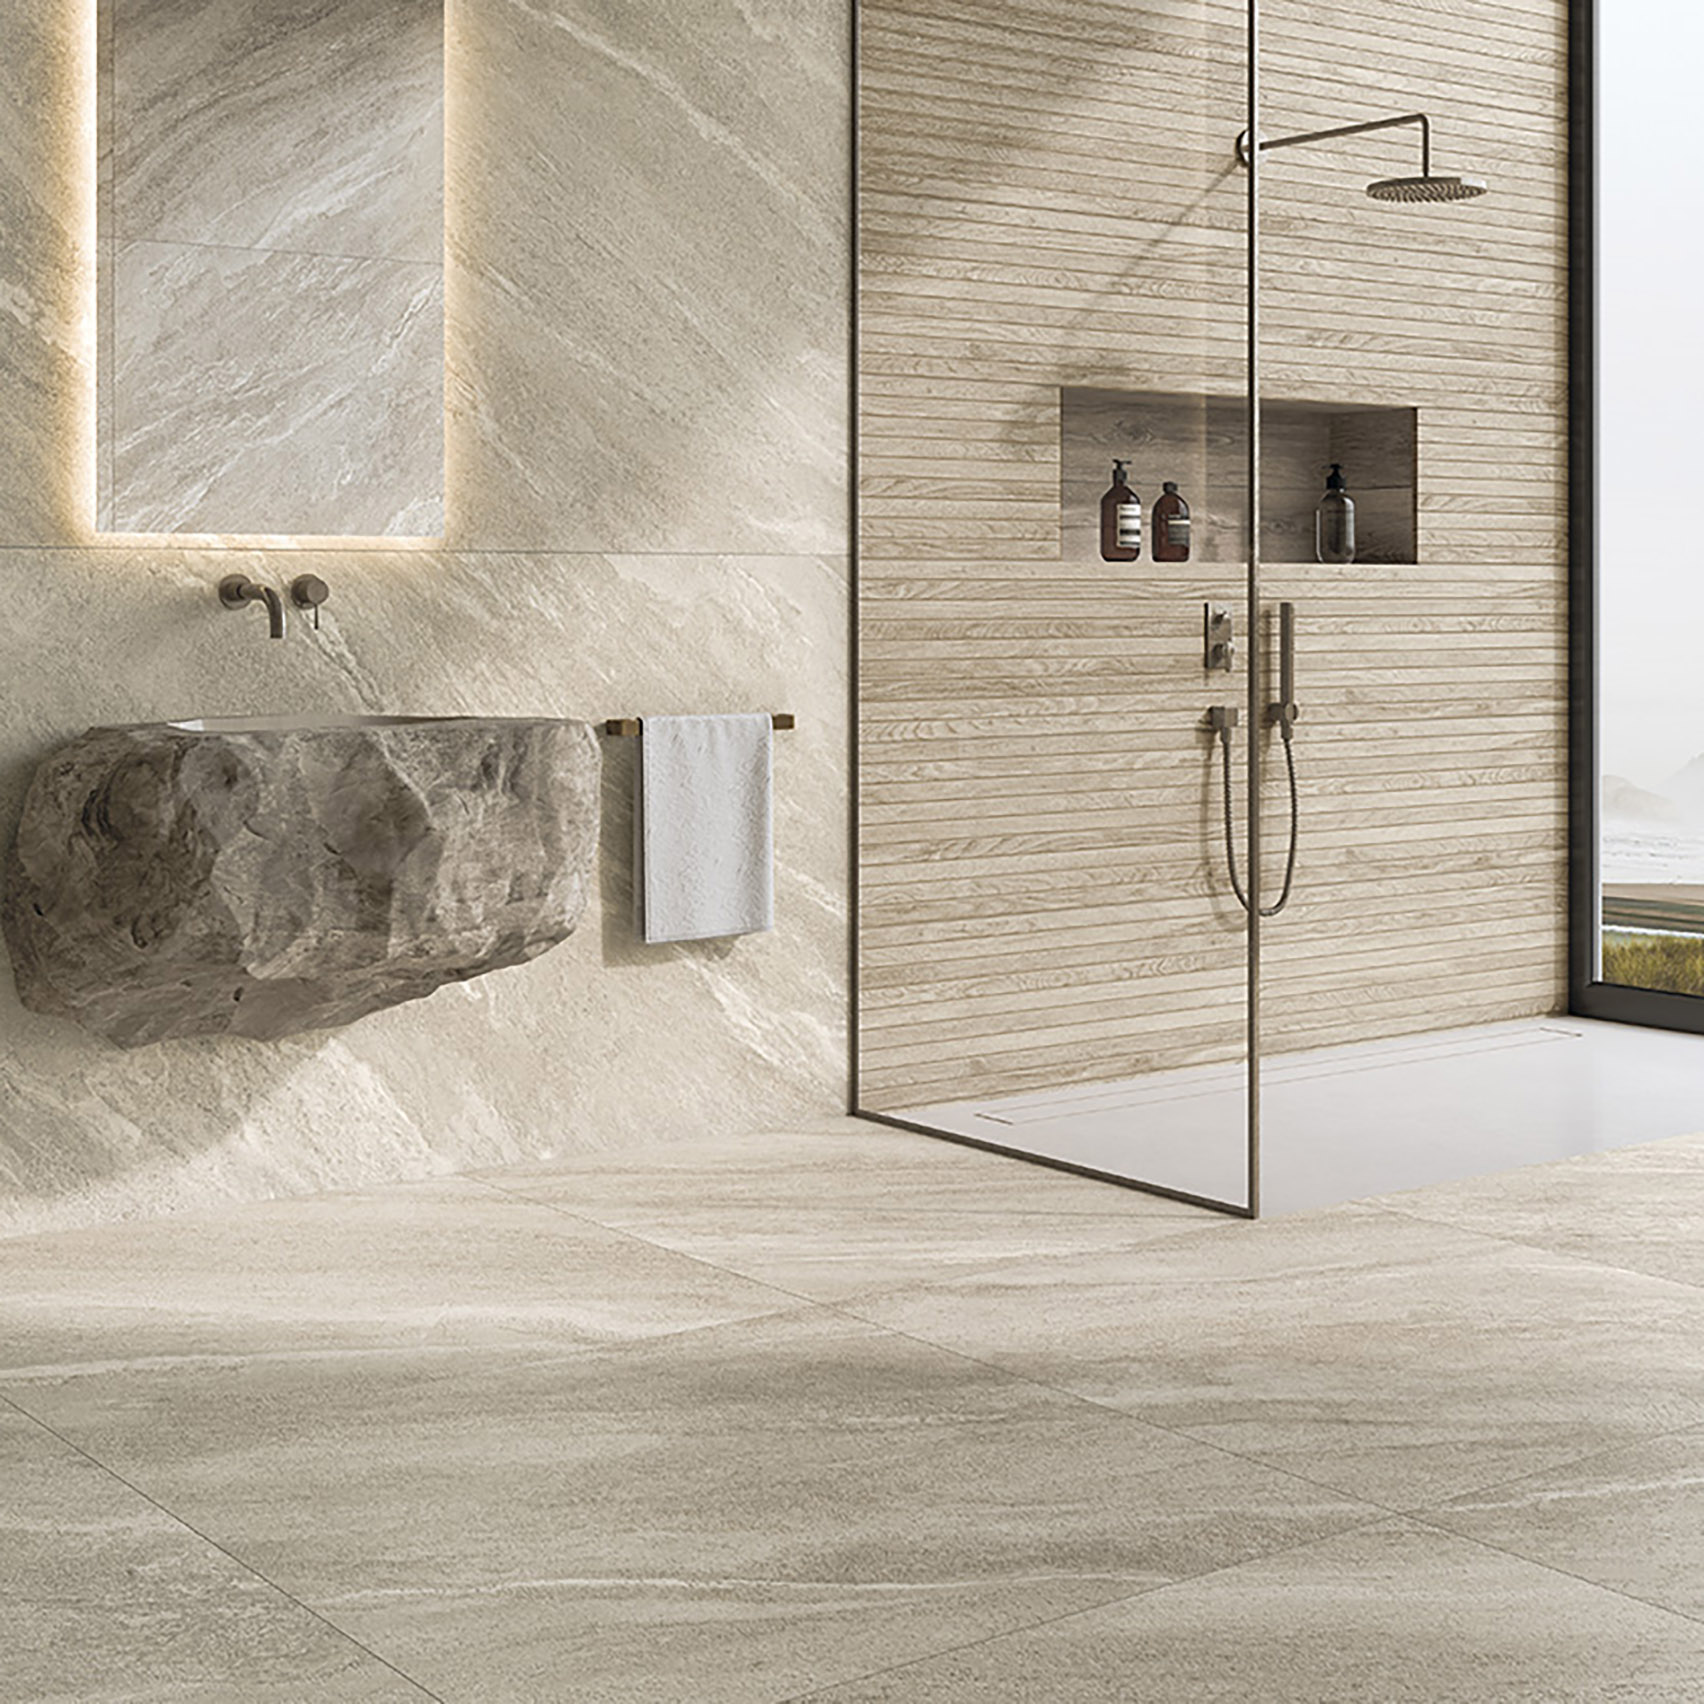 Strond Porcelain Tiles By Museum